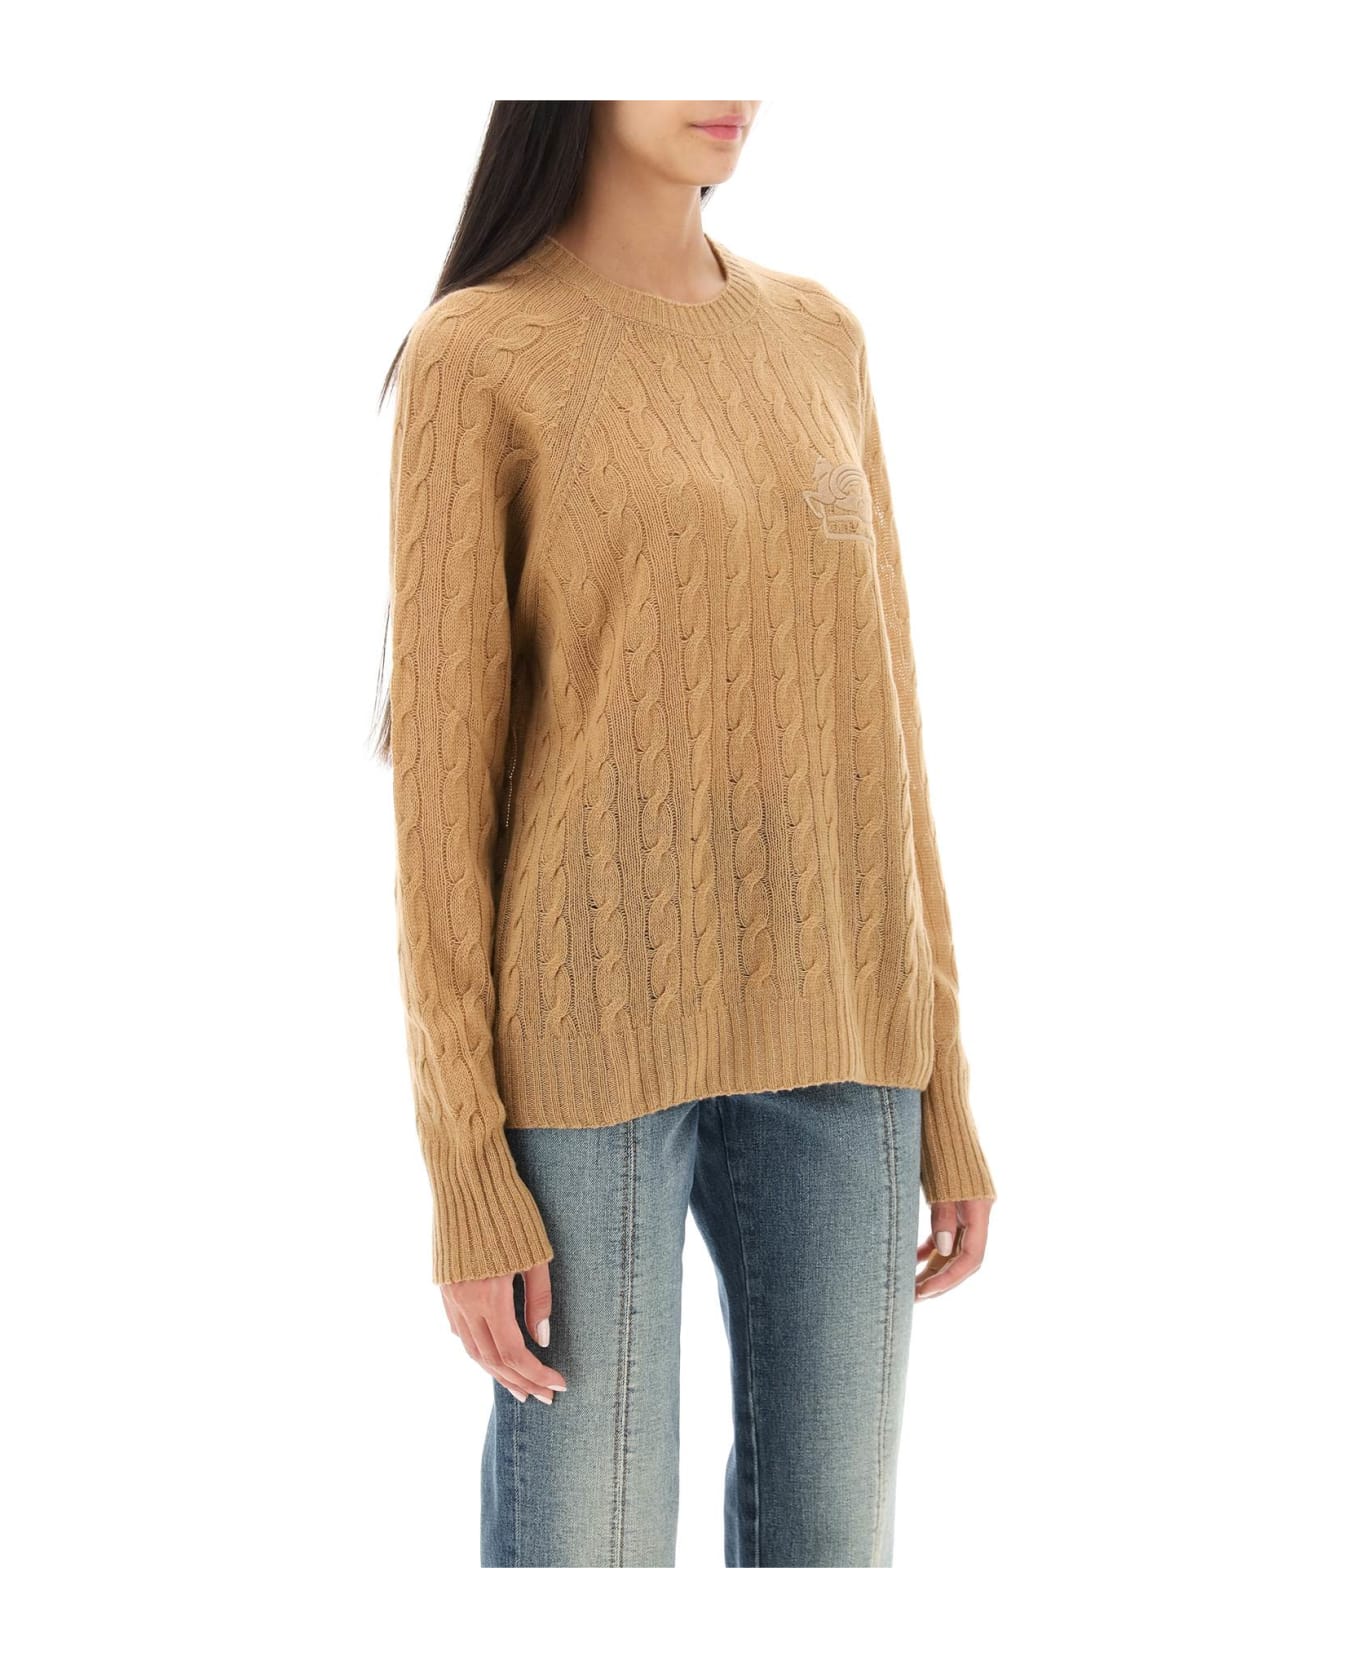 Etro Cashmere Sweater With Pegasus Embroidery - Beige